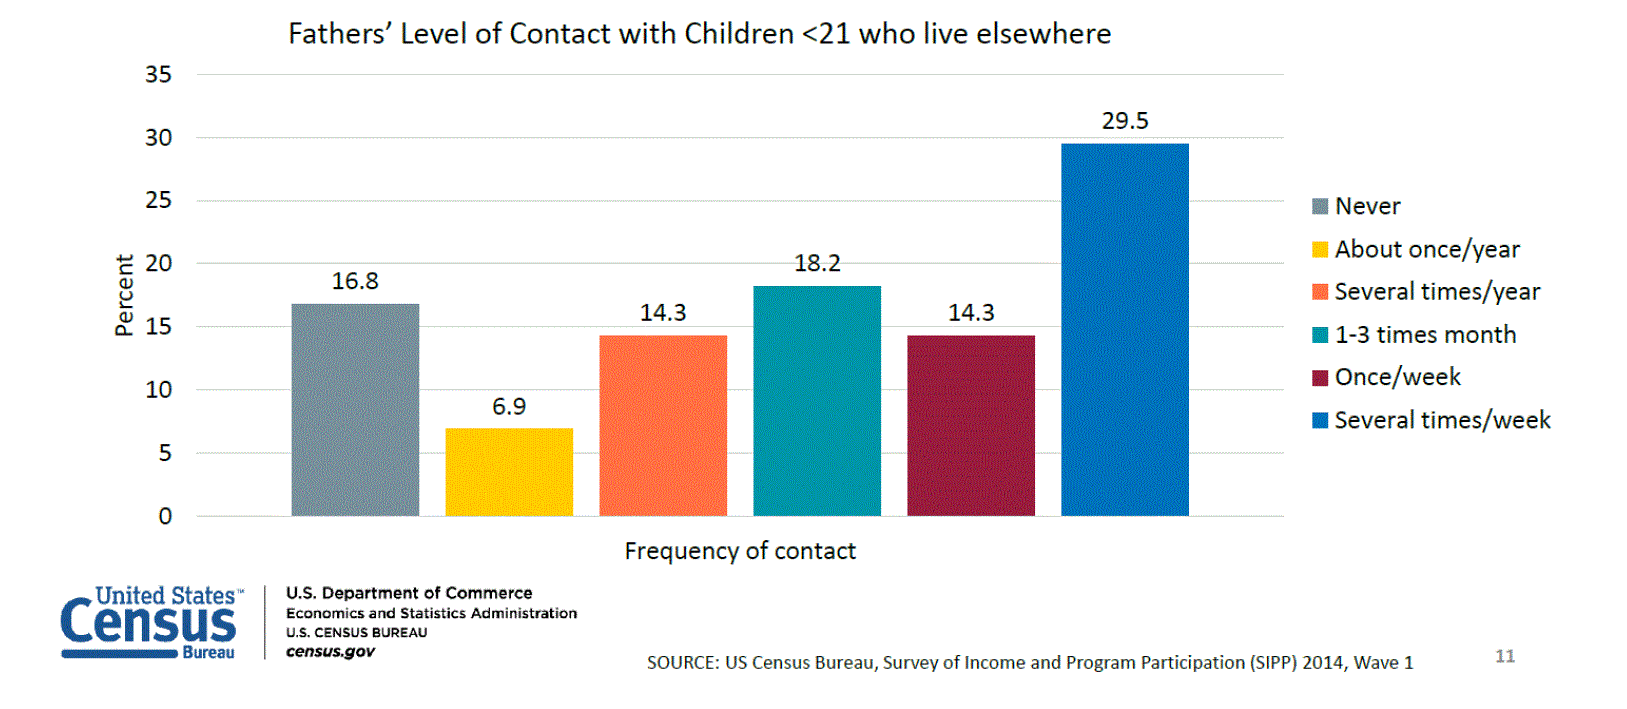 Bar graph of census data on father's contact with their children under age 21 who do not reside with them. Almost 17% have spent no time with their children, 7% meet once a year, 14% meet several times a year, 18% meet 1-3 times a month, 14% meet at least once a week, and nearly 30% meet several times a week.